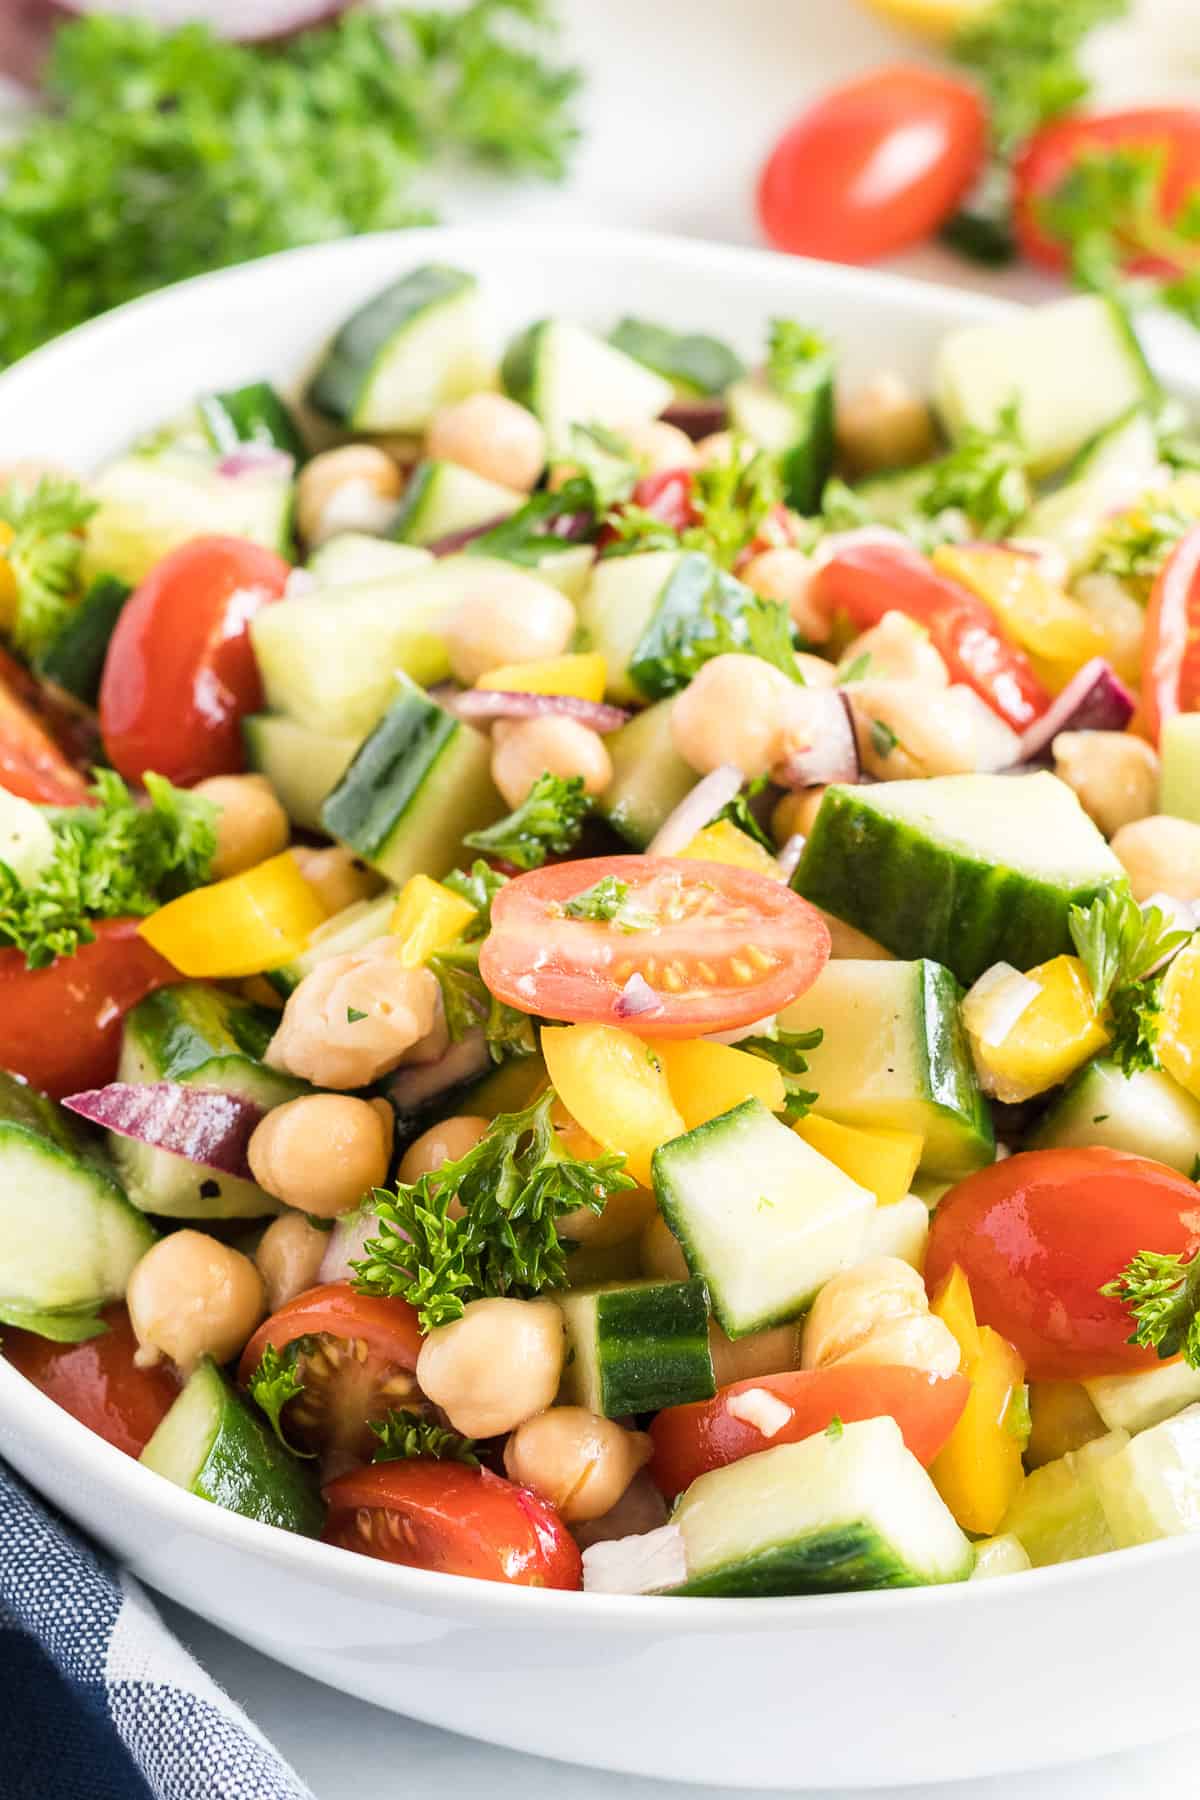 A close up of the salad with chickpeas, cucumbers, and tomatoes in a white serving bowl.